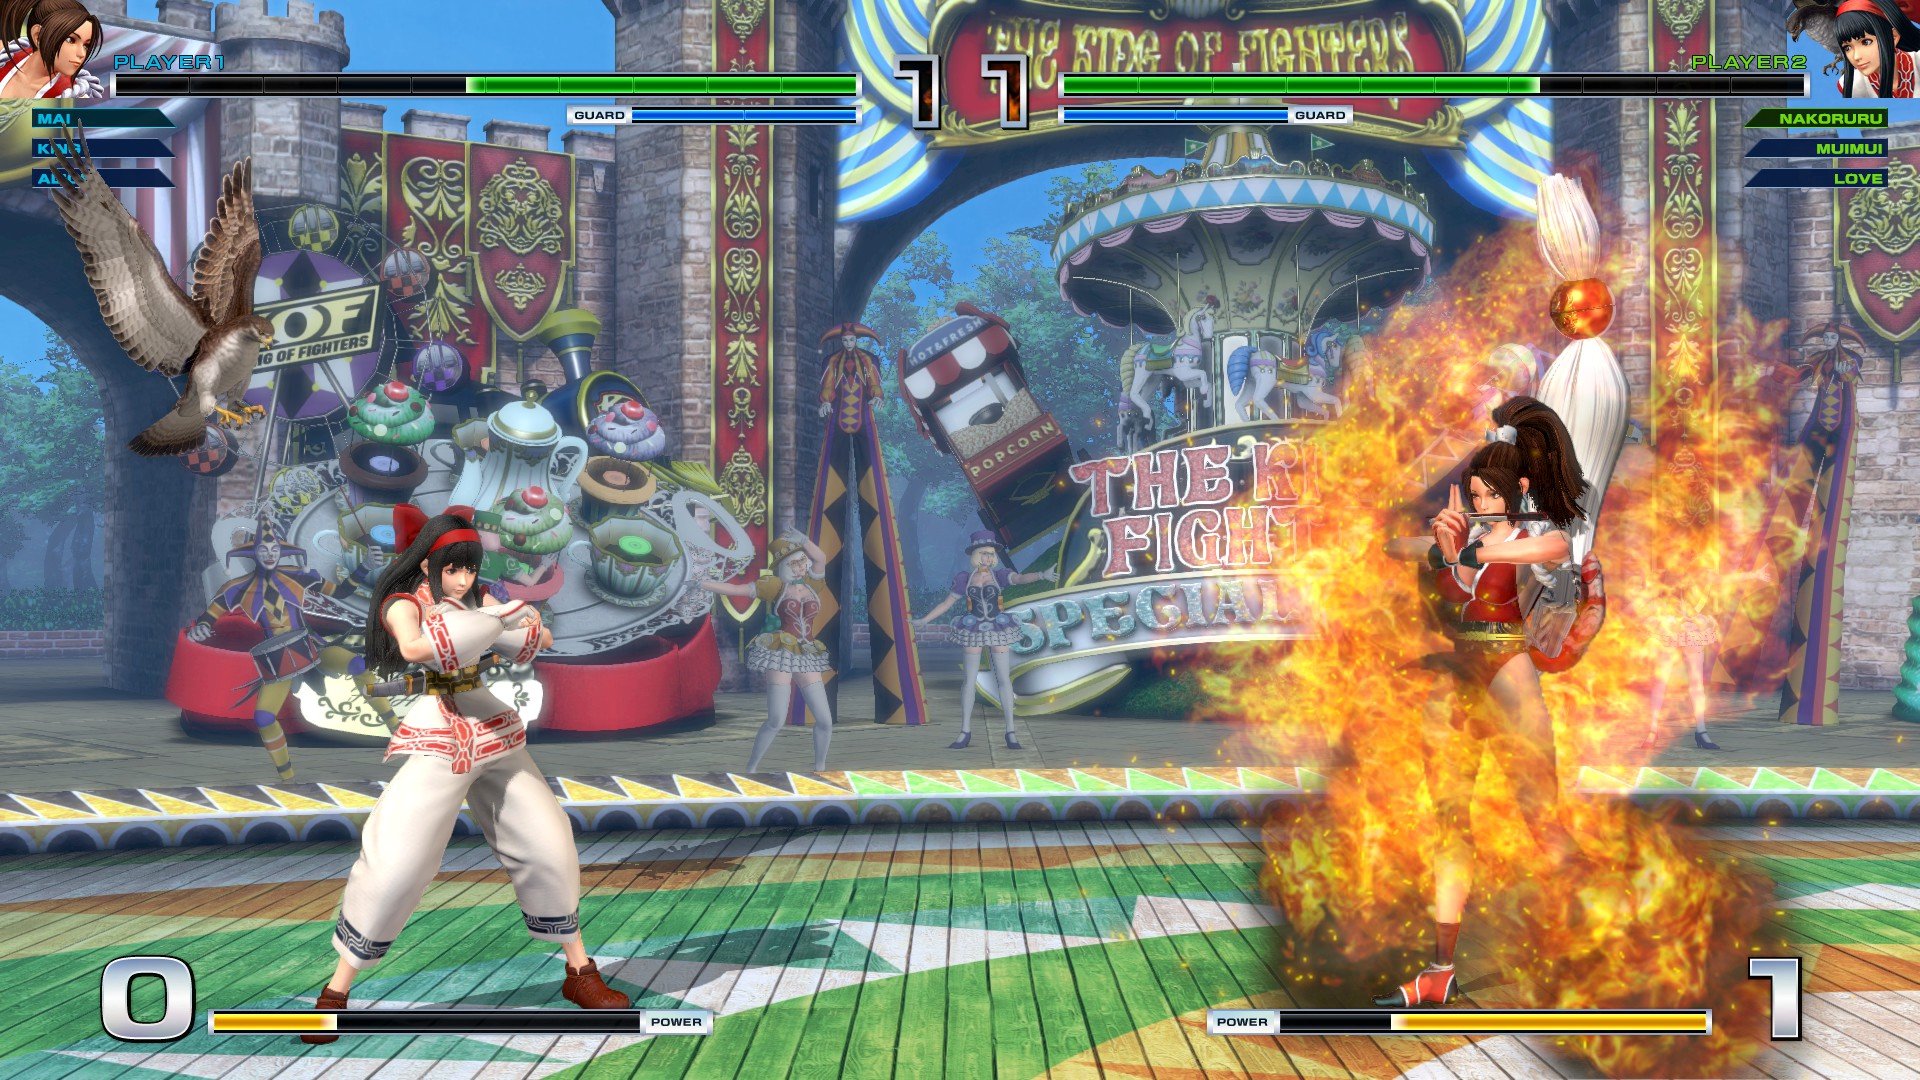 One of the best fighting games ever is now free to play on Steam